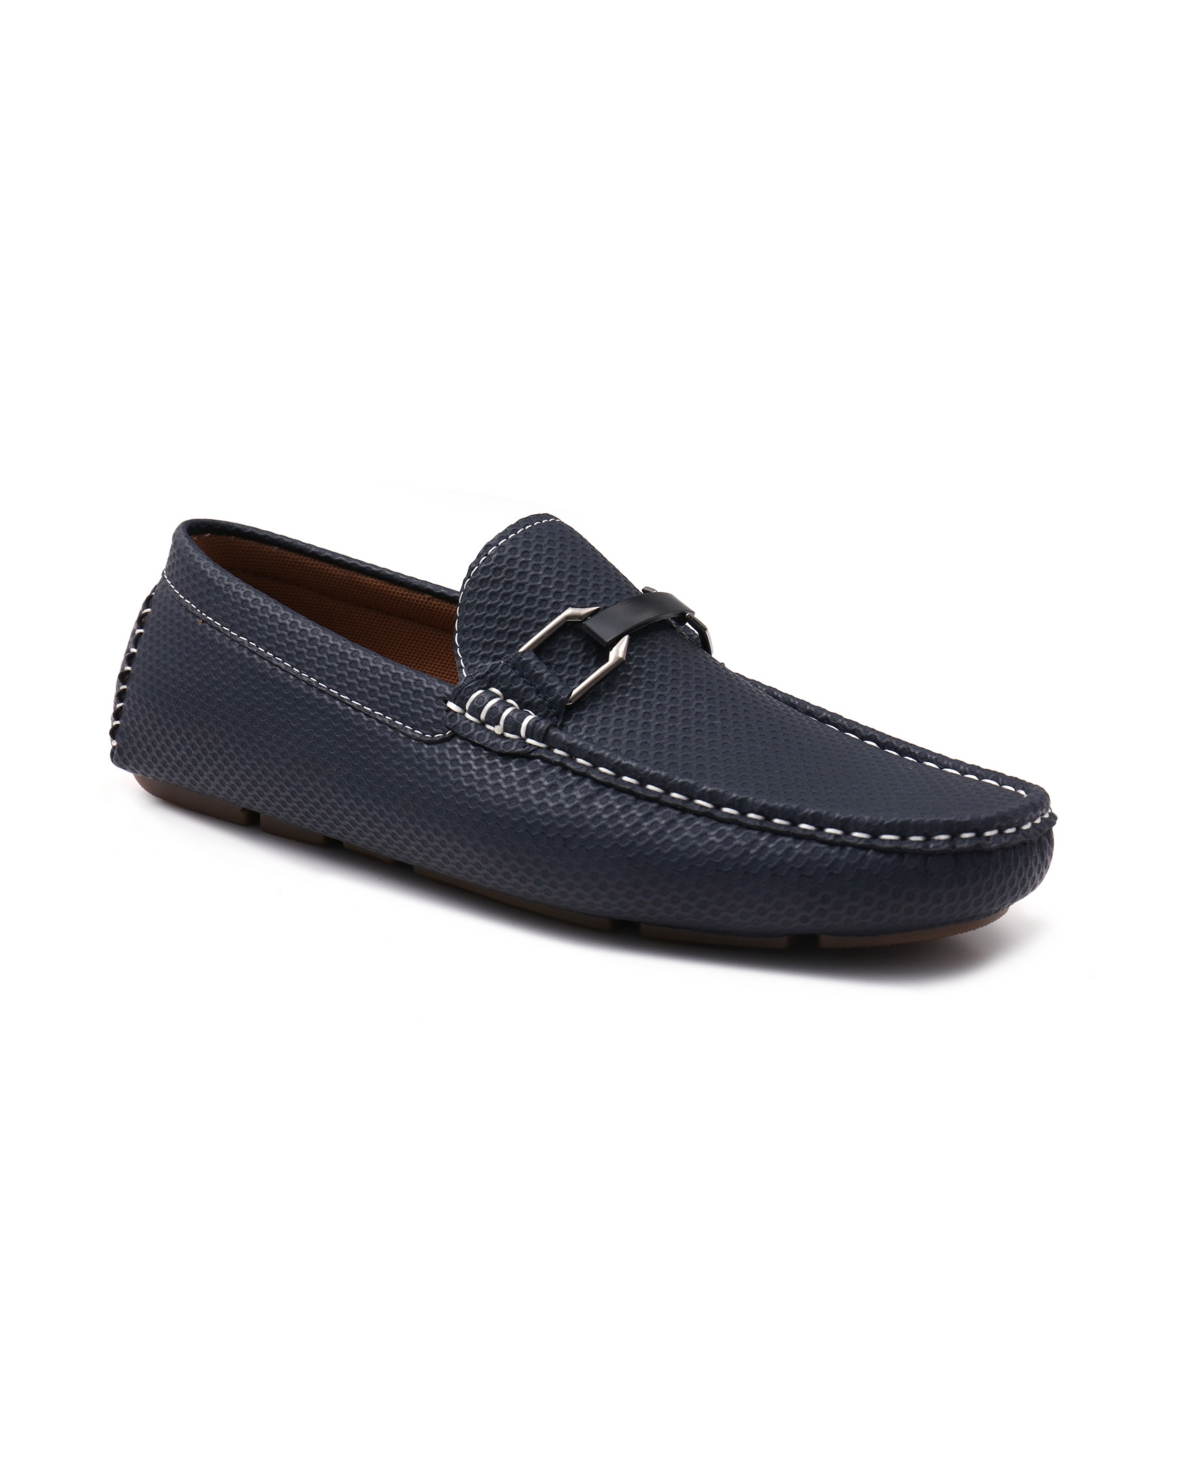 Men's Charter Driving Loafers - Maroon